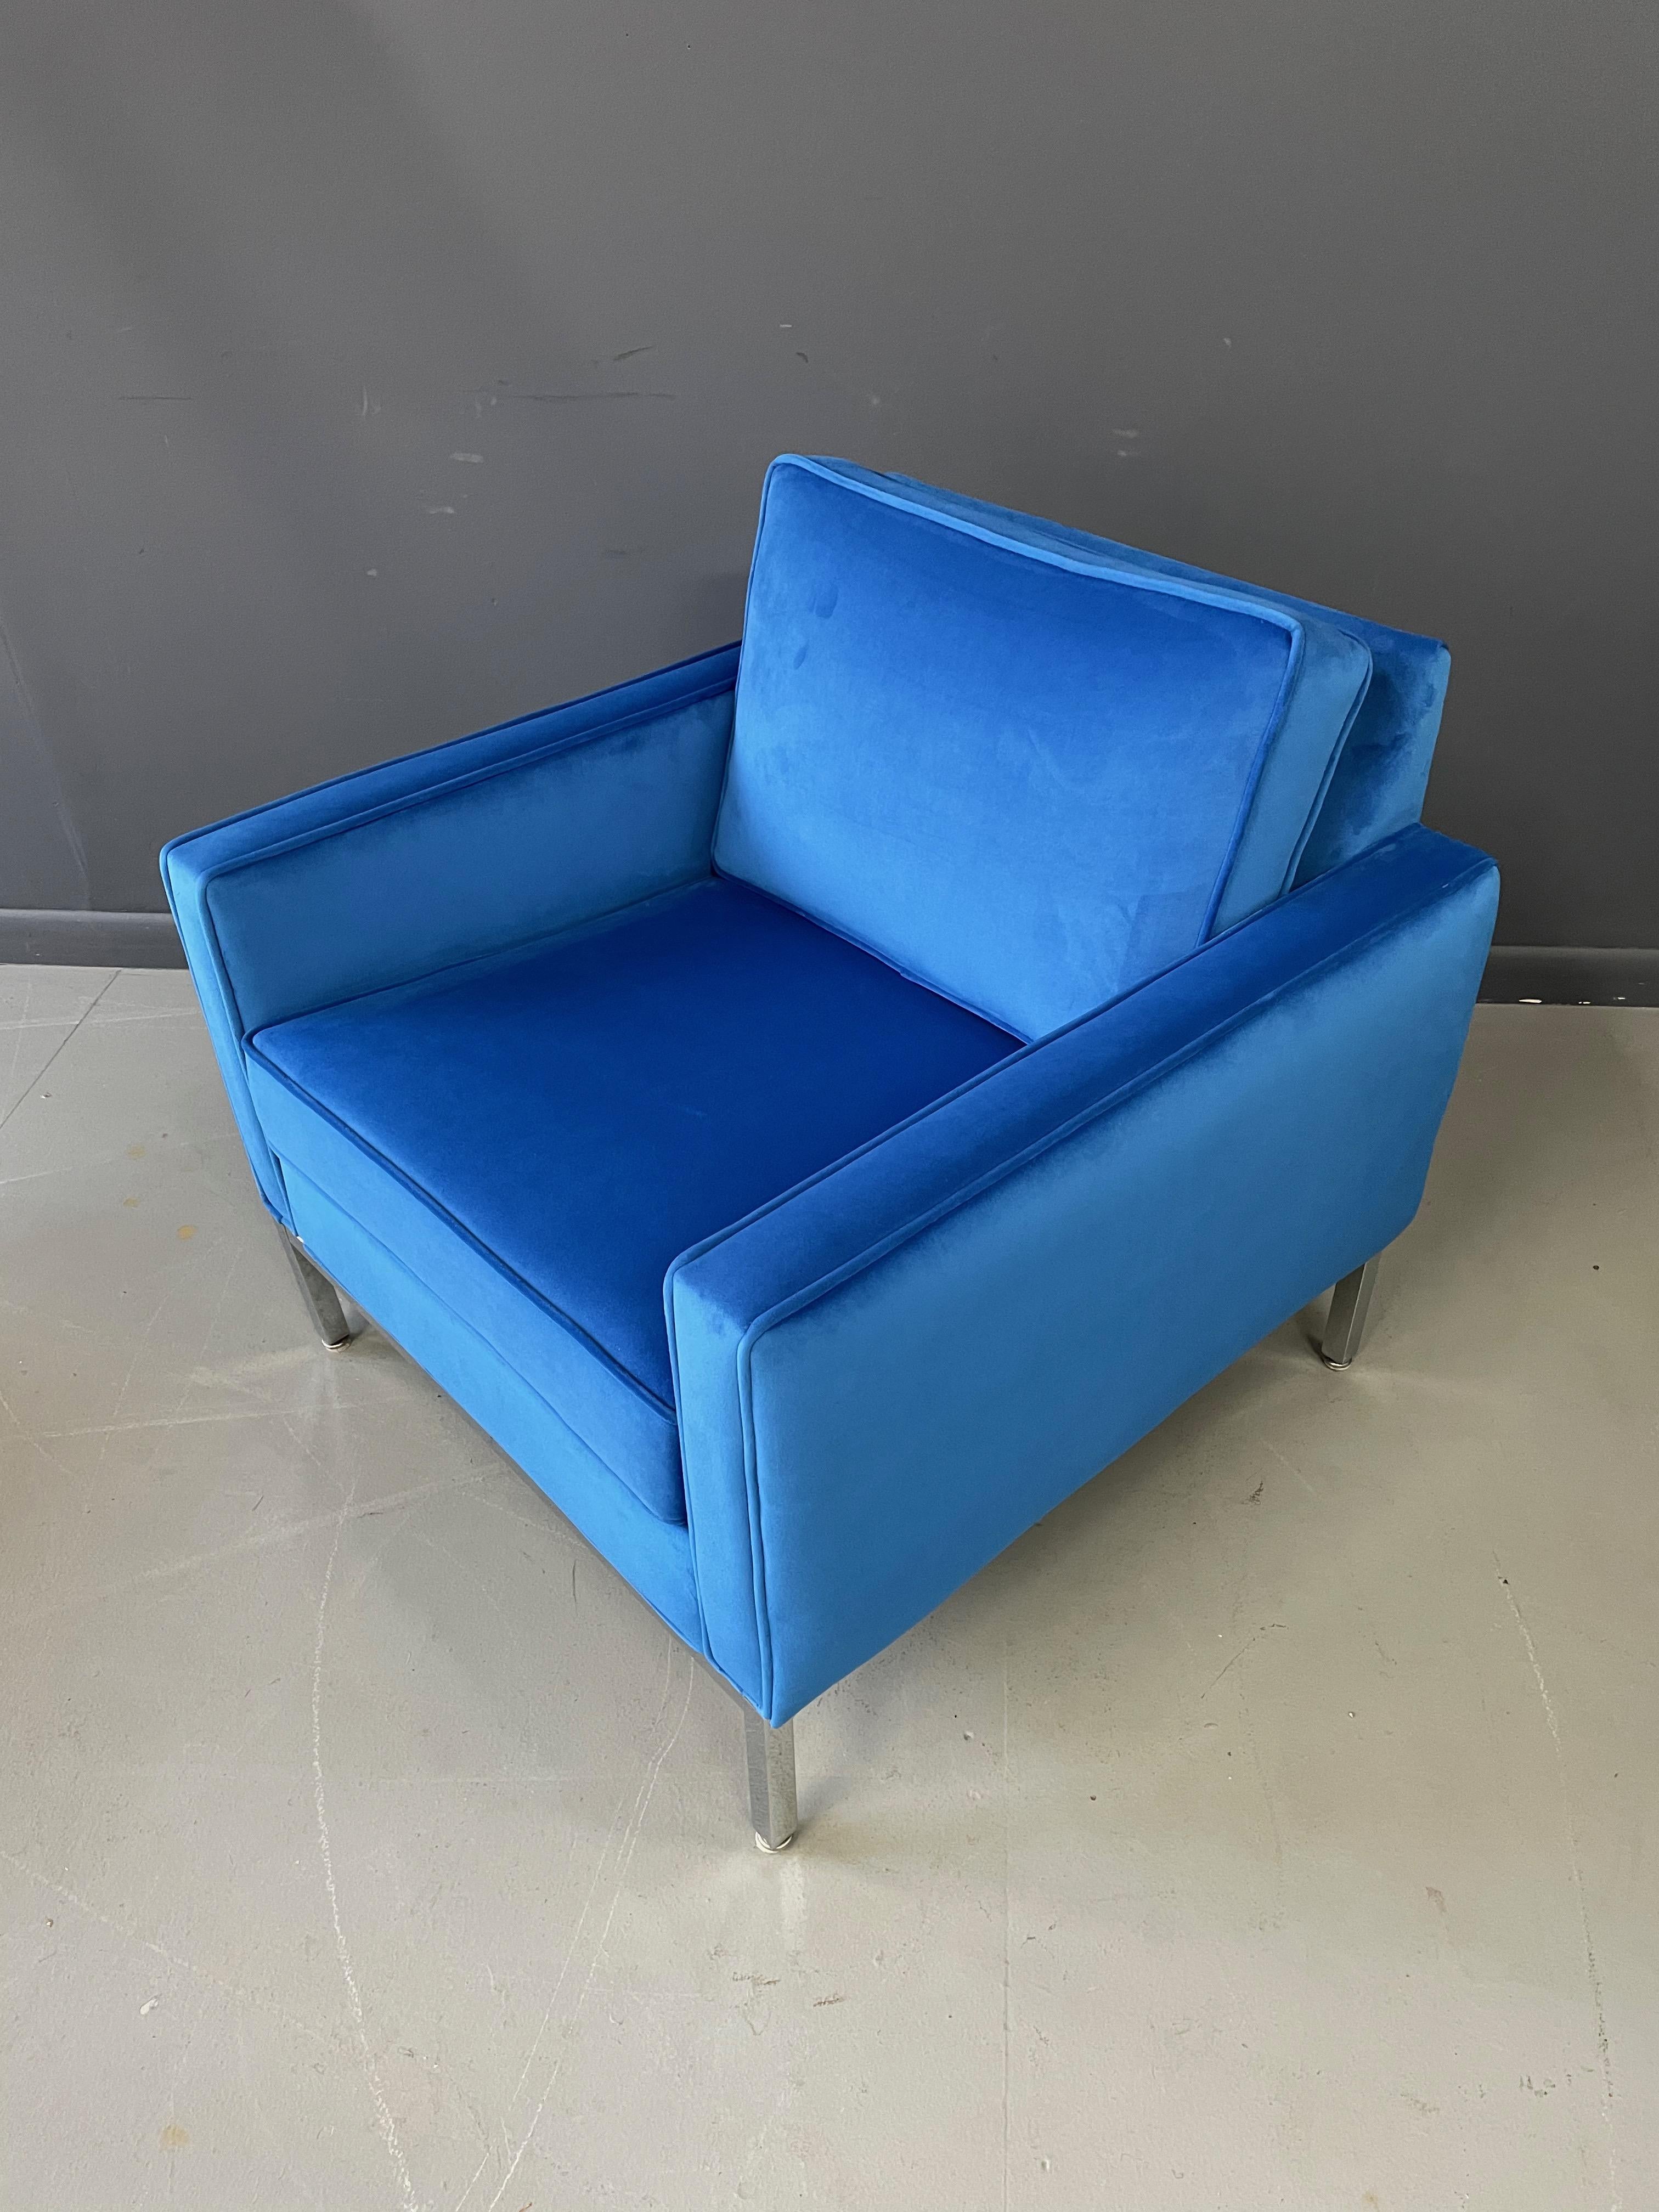 Steelcase Chromed Steel Lounge Chair Draped in Blue Velvet Midcentury In Excellent Condition For Sale In Philadelphia, PA